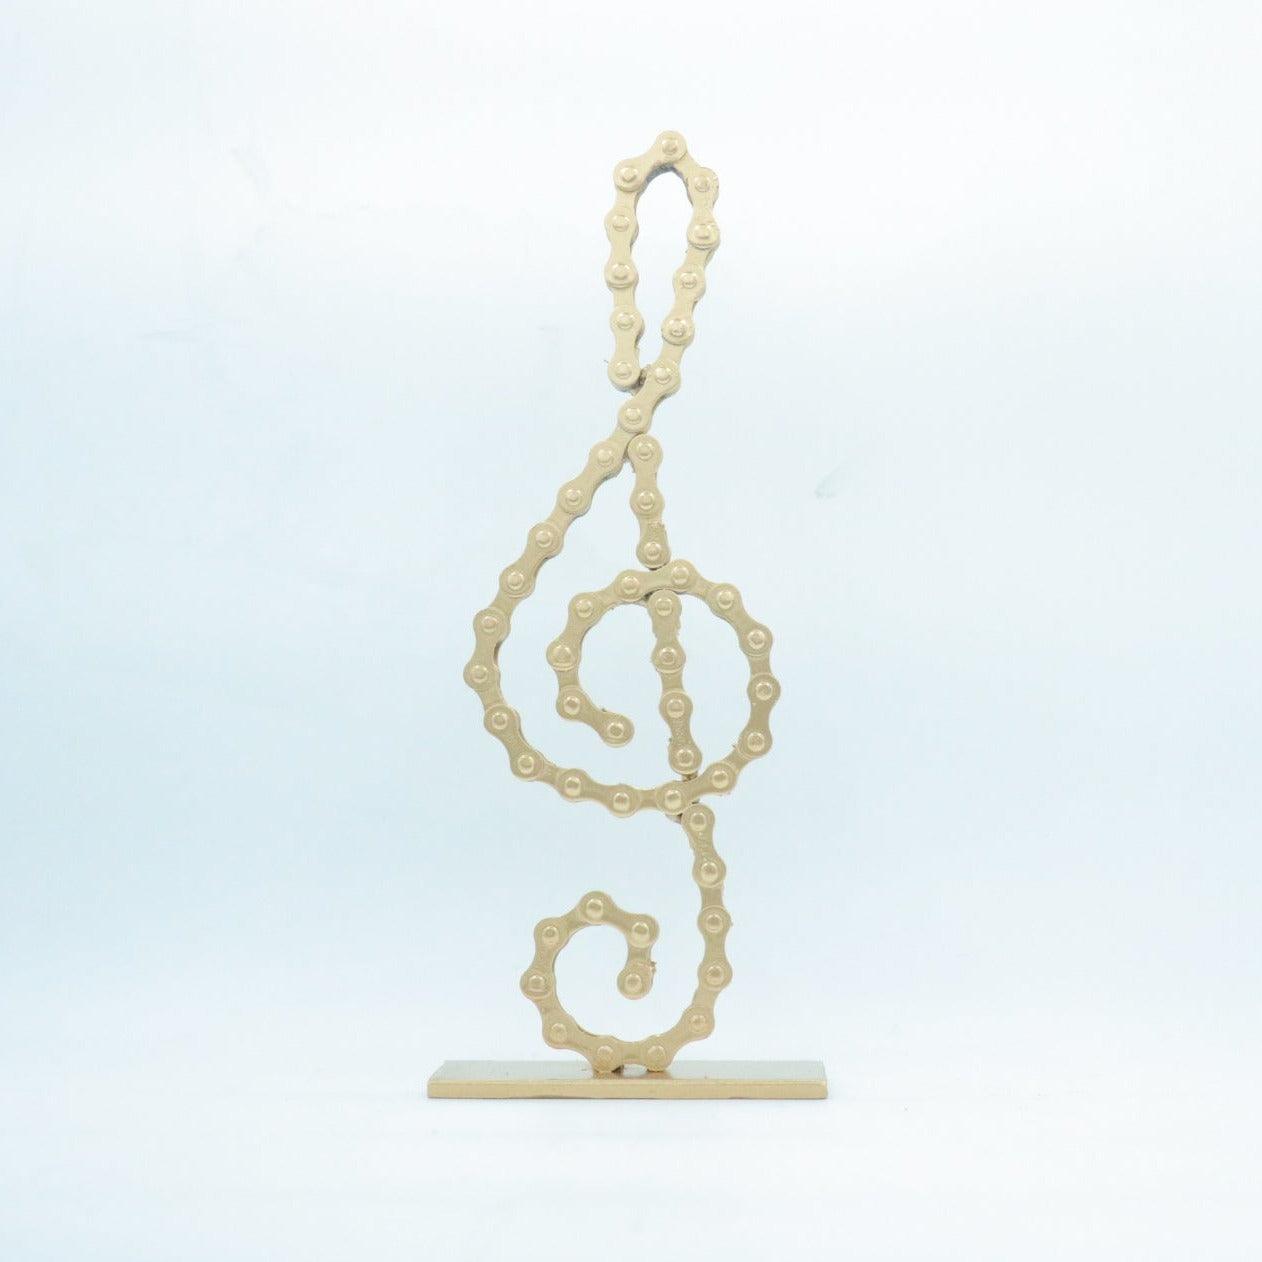 G clef Sculpture | UNCHAINED by NIRIT LEVAV PACKER